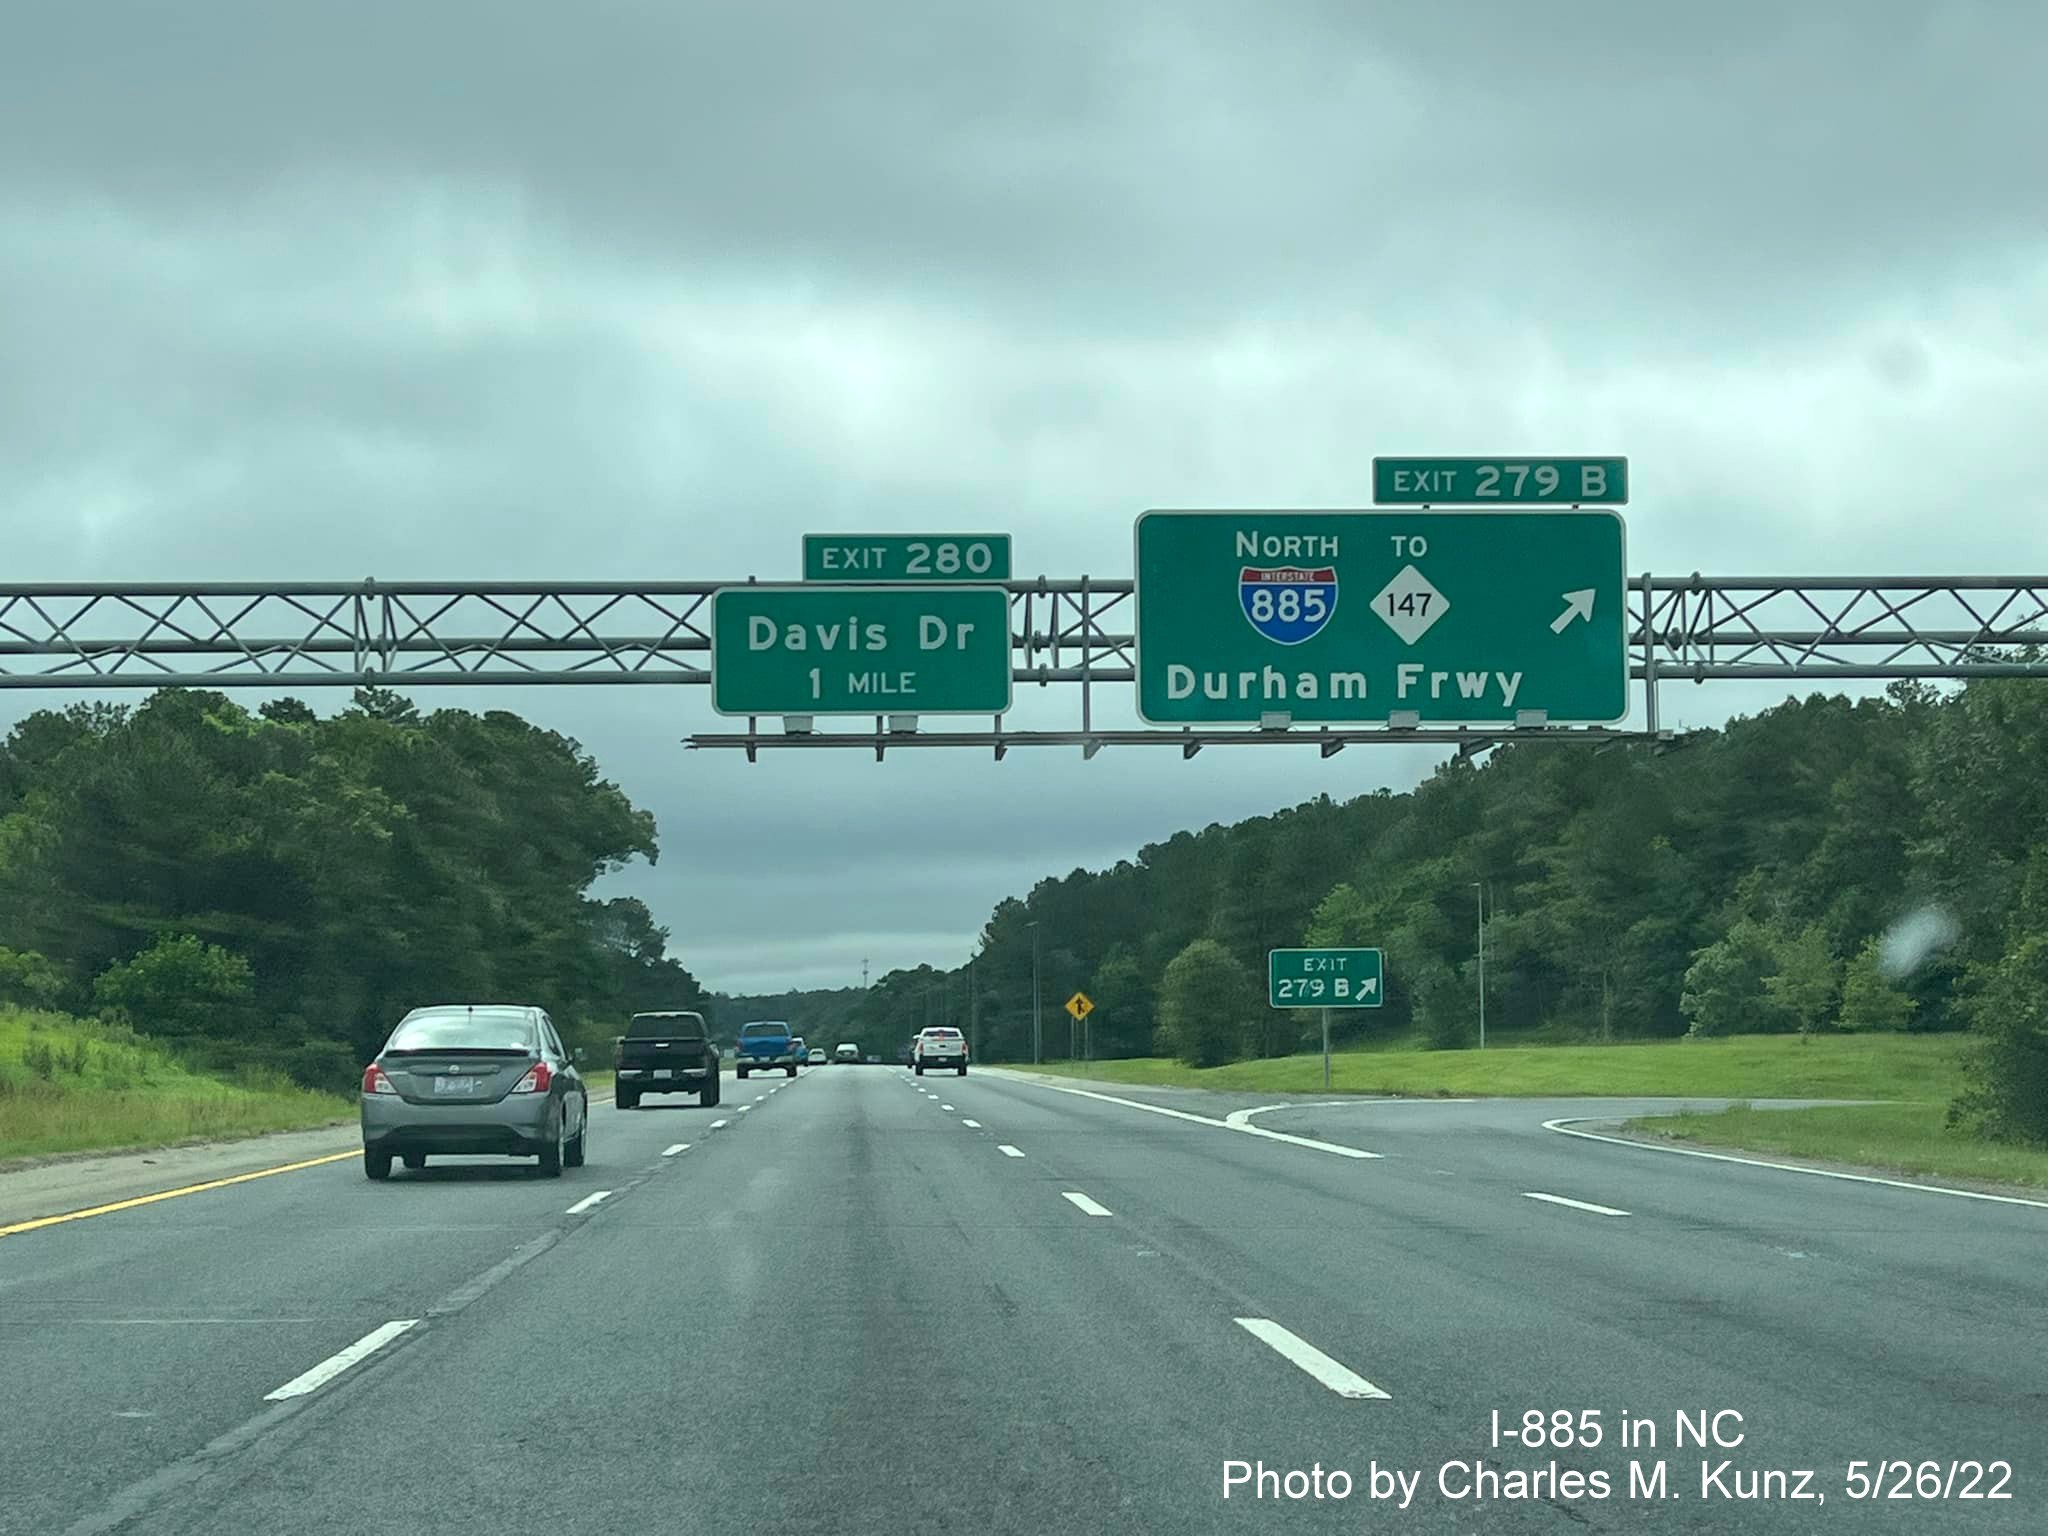 Image of new I-885 exit sign along I-40 East in Durham, by Charles M. Kunz, May 2022